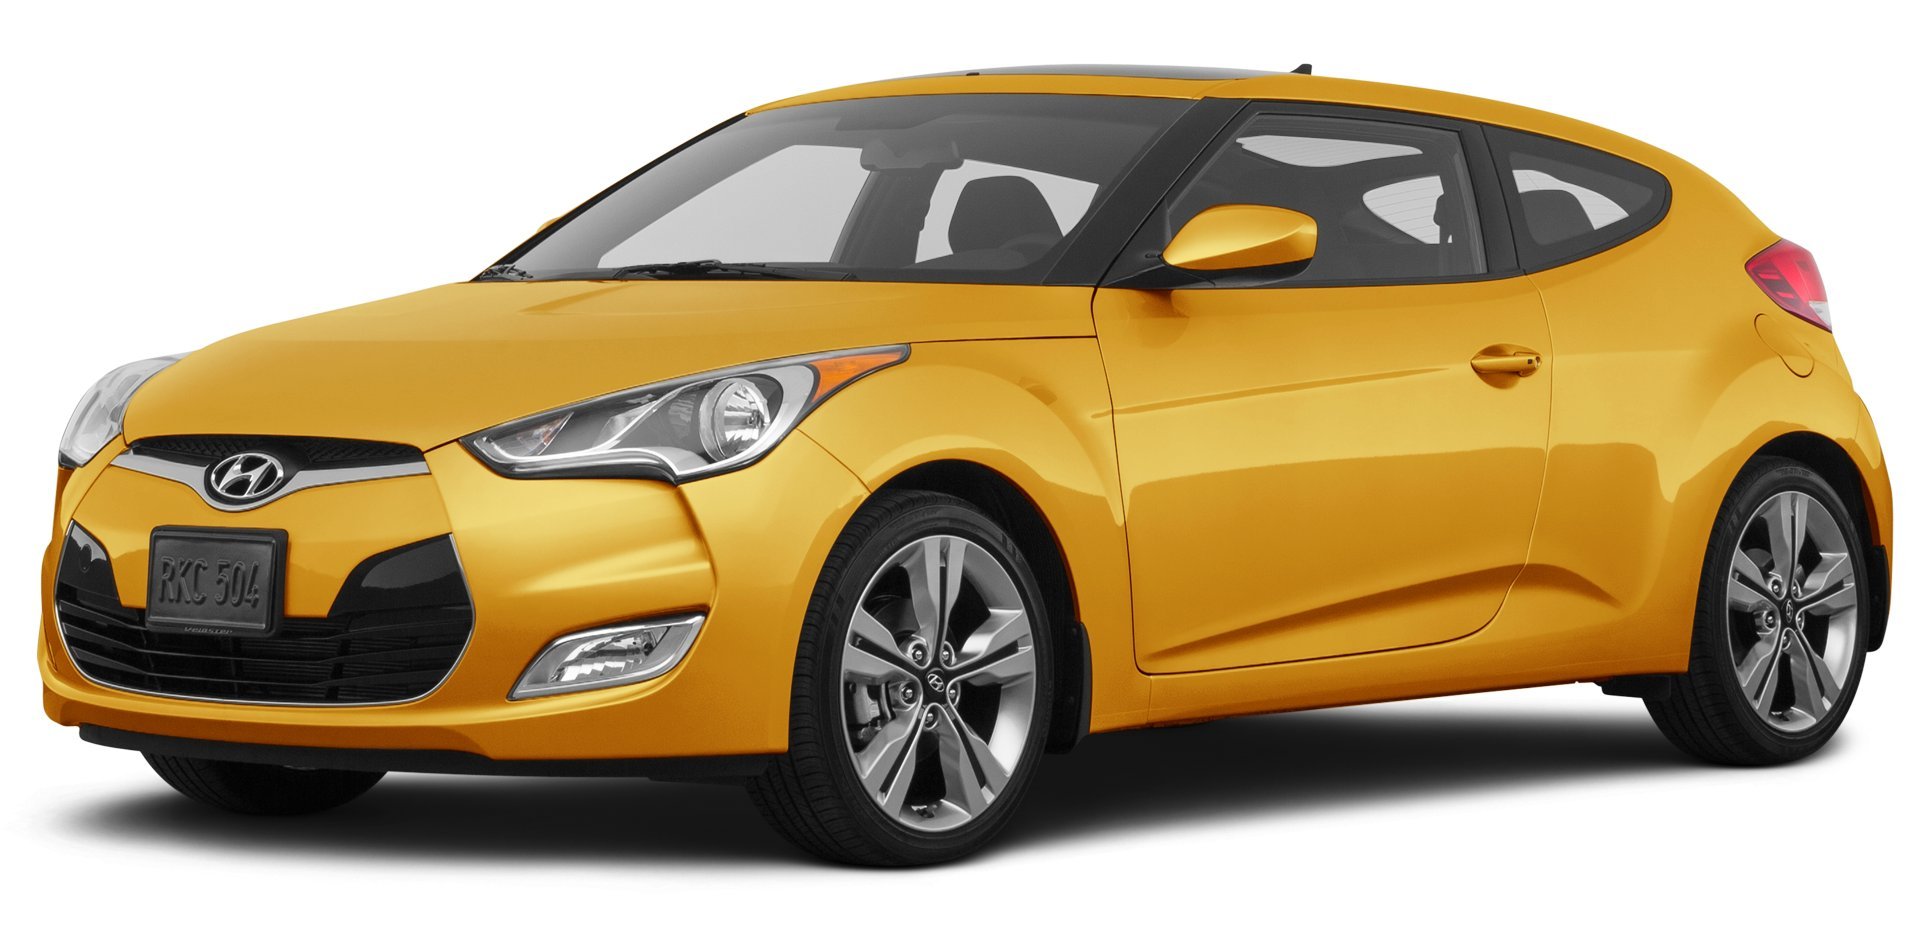 2017 Hyundai Veloster oem parts and accessories on sale